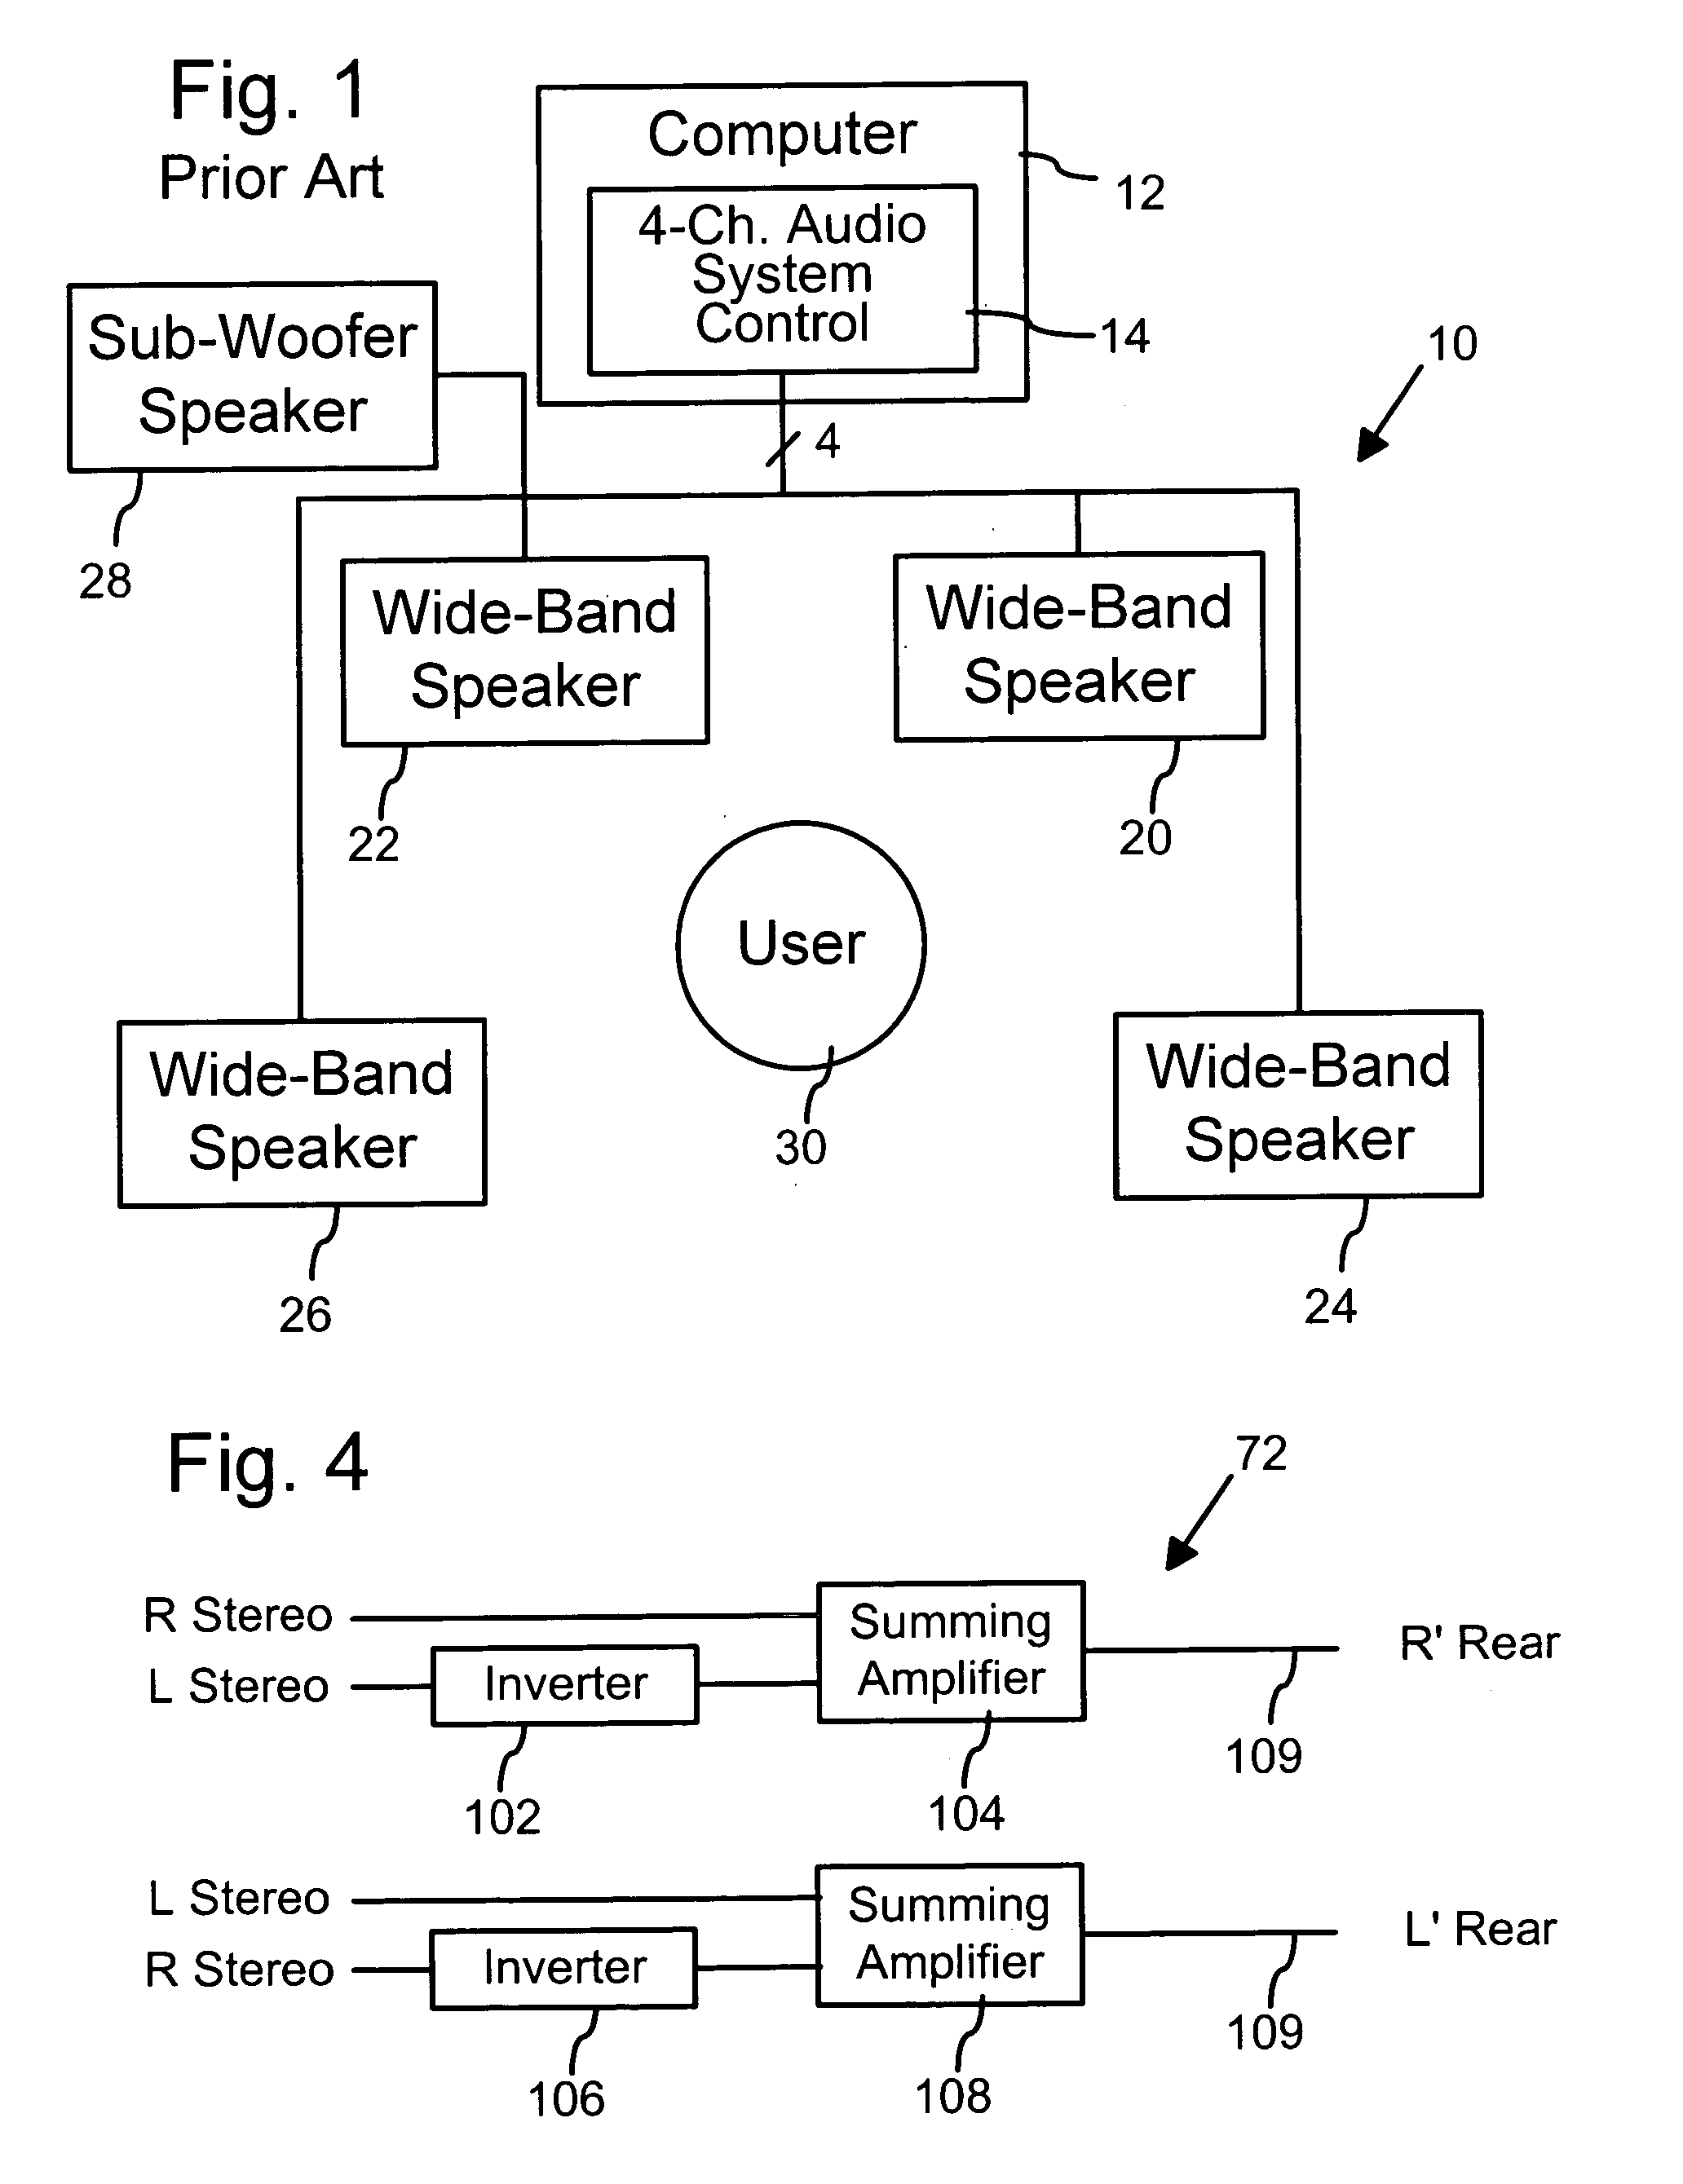 Universal four-channel surround sound speaker system for multimedia computer audio sub-systems